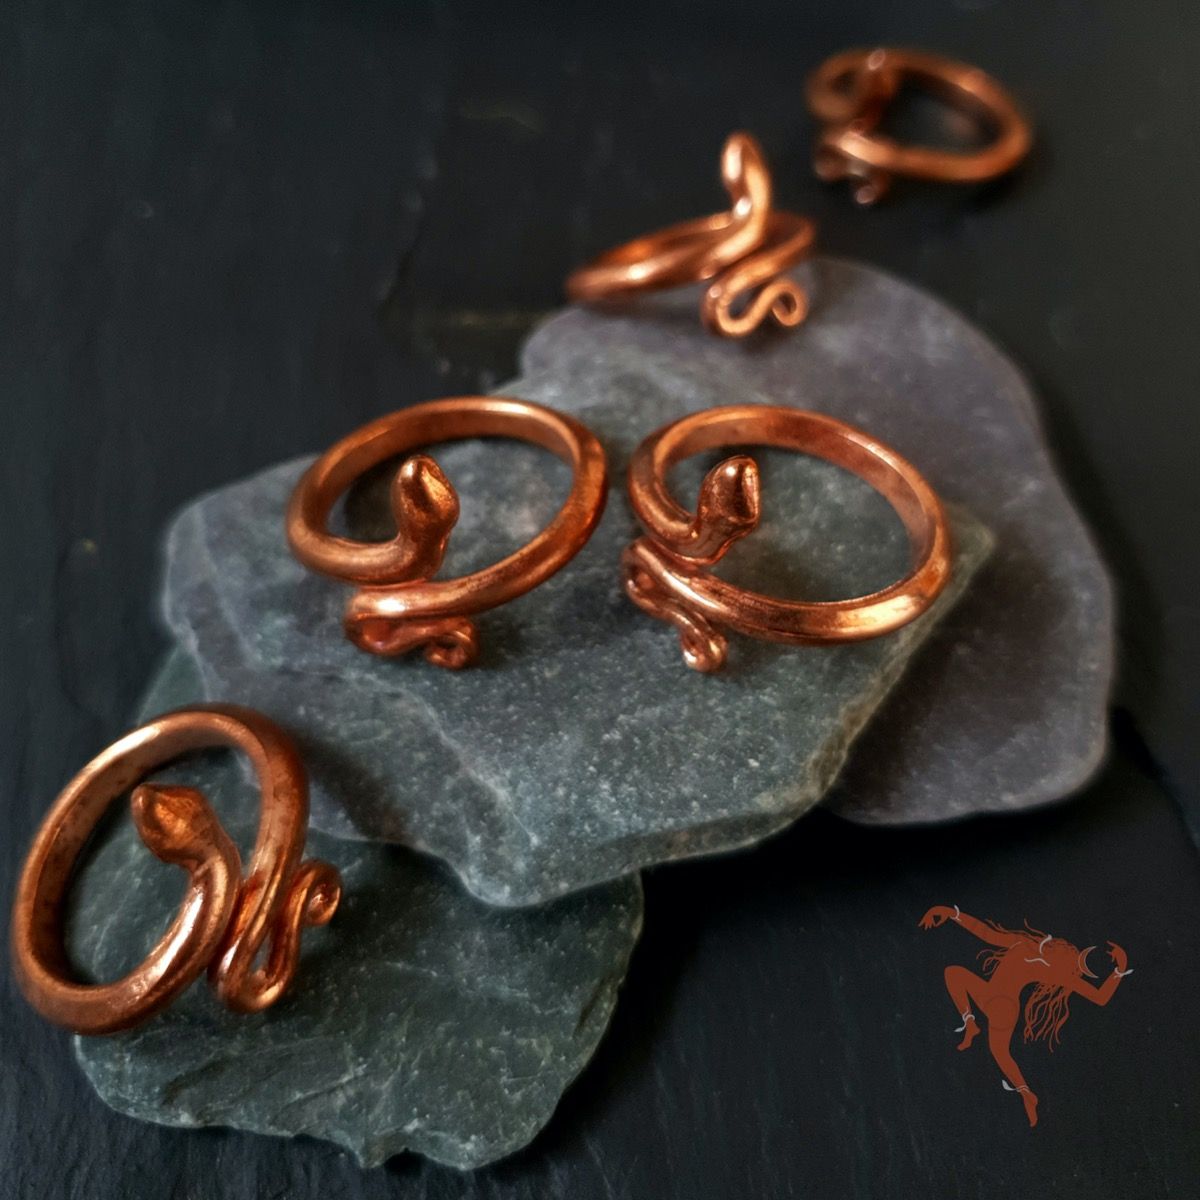 ISHA Consecrated Copper Ring - Large (Snake Ring - Sarpasutra) Best Price  ll | eBay